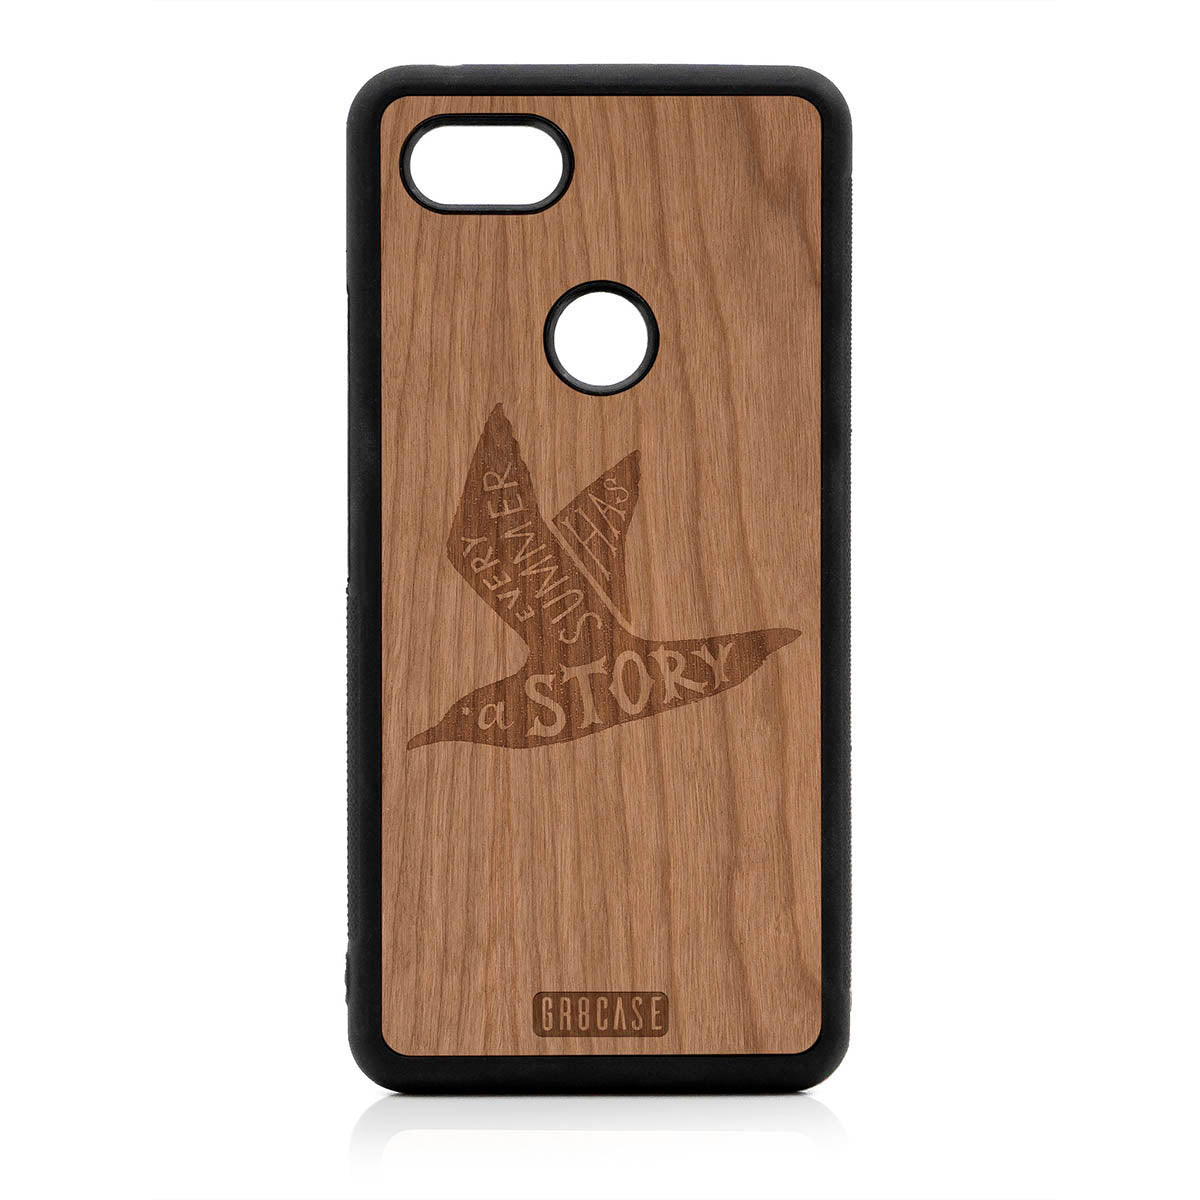 Every Summer Has A Story (Seagull) Design Wood Case For Google Pixel 3 XL